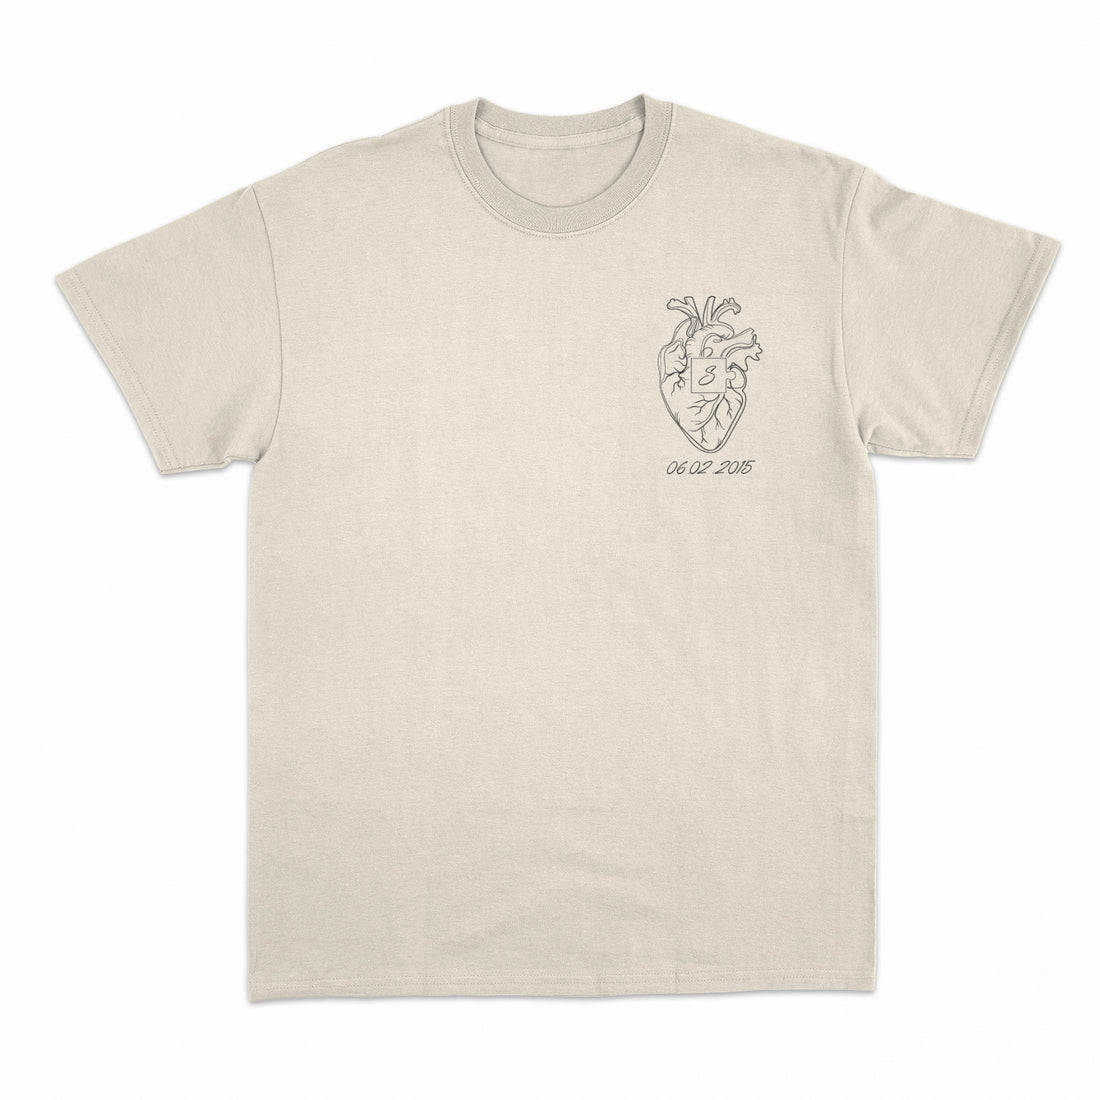 Personalized T-Shirt Heart Puzzle Illustration With Date